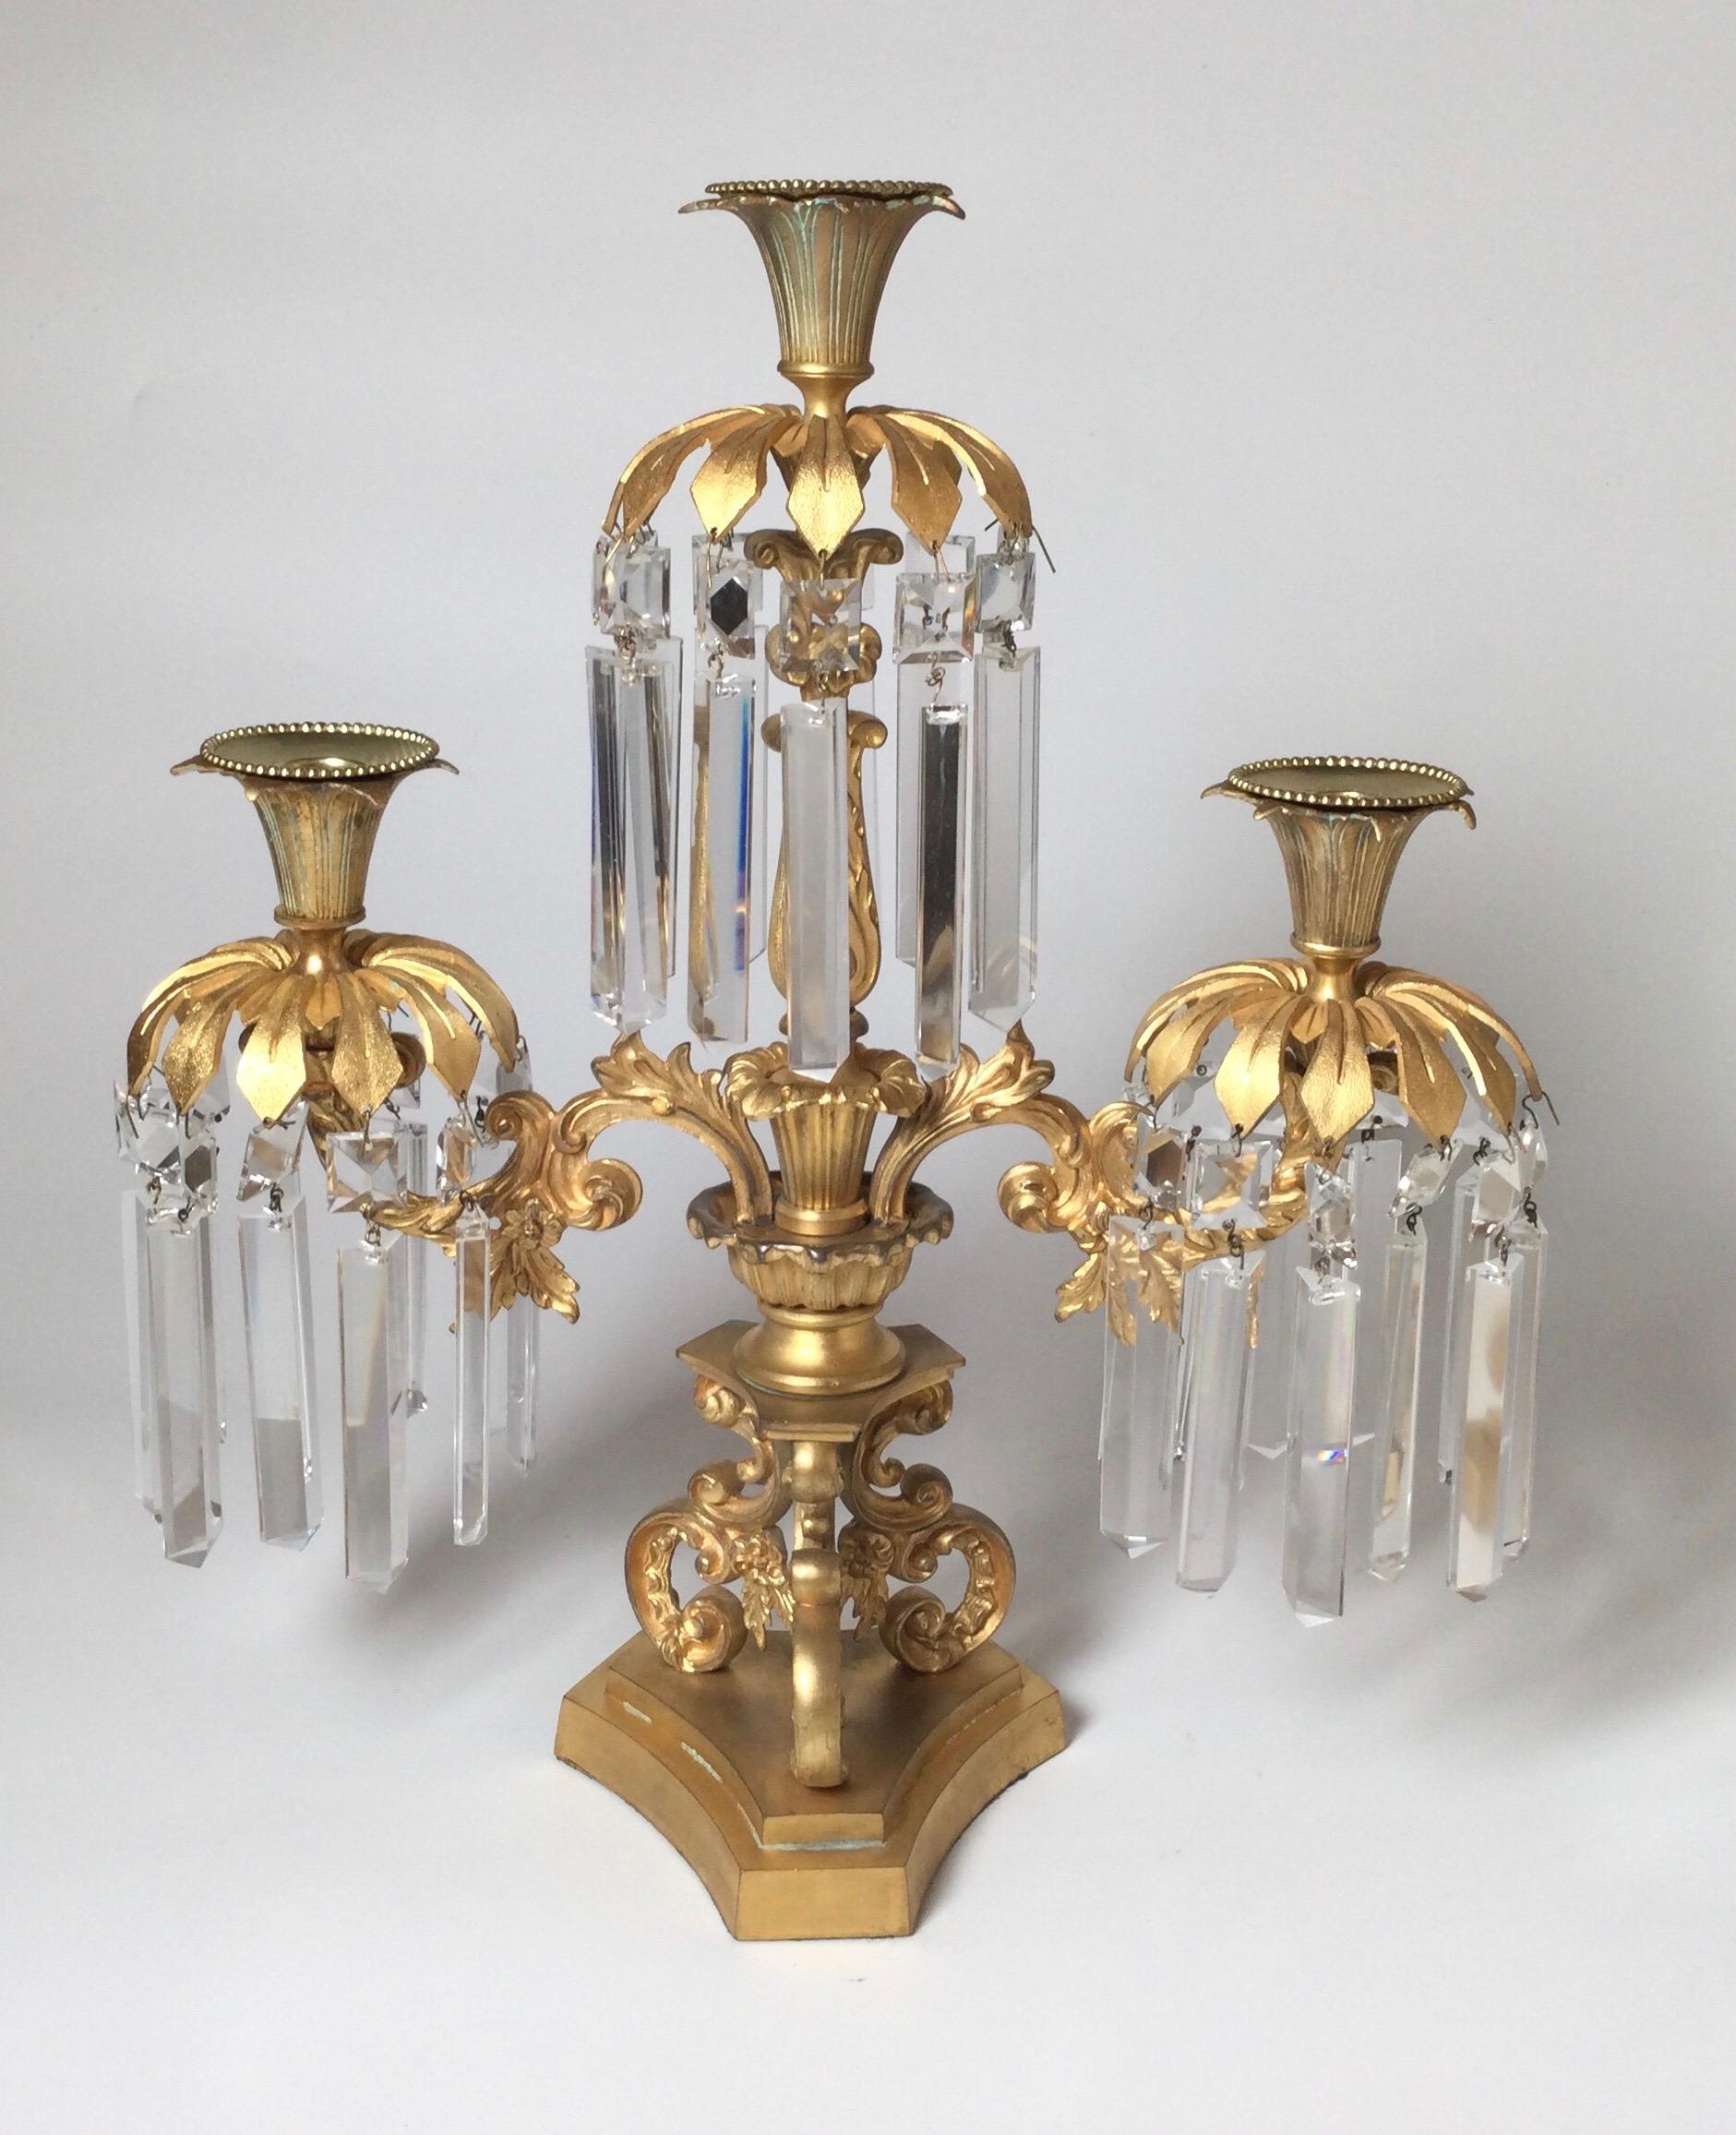 Elegant pair of cast and gilt bronze candelabra lusters. The three arms with long panel cut crystals with scrolling center column, France Circa 1880's.